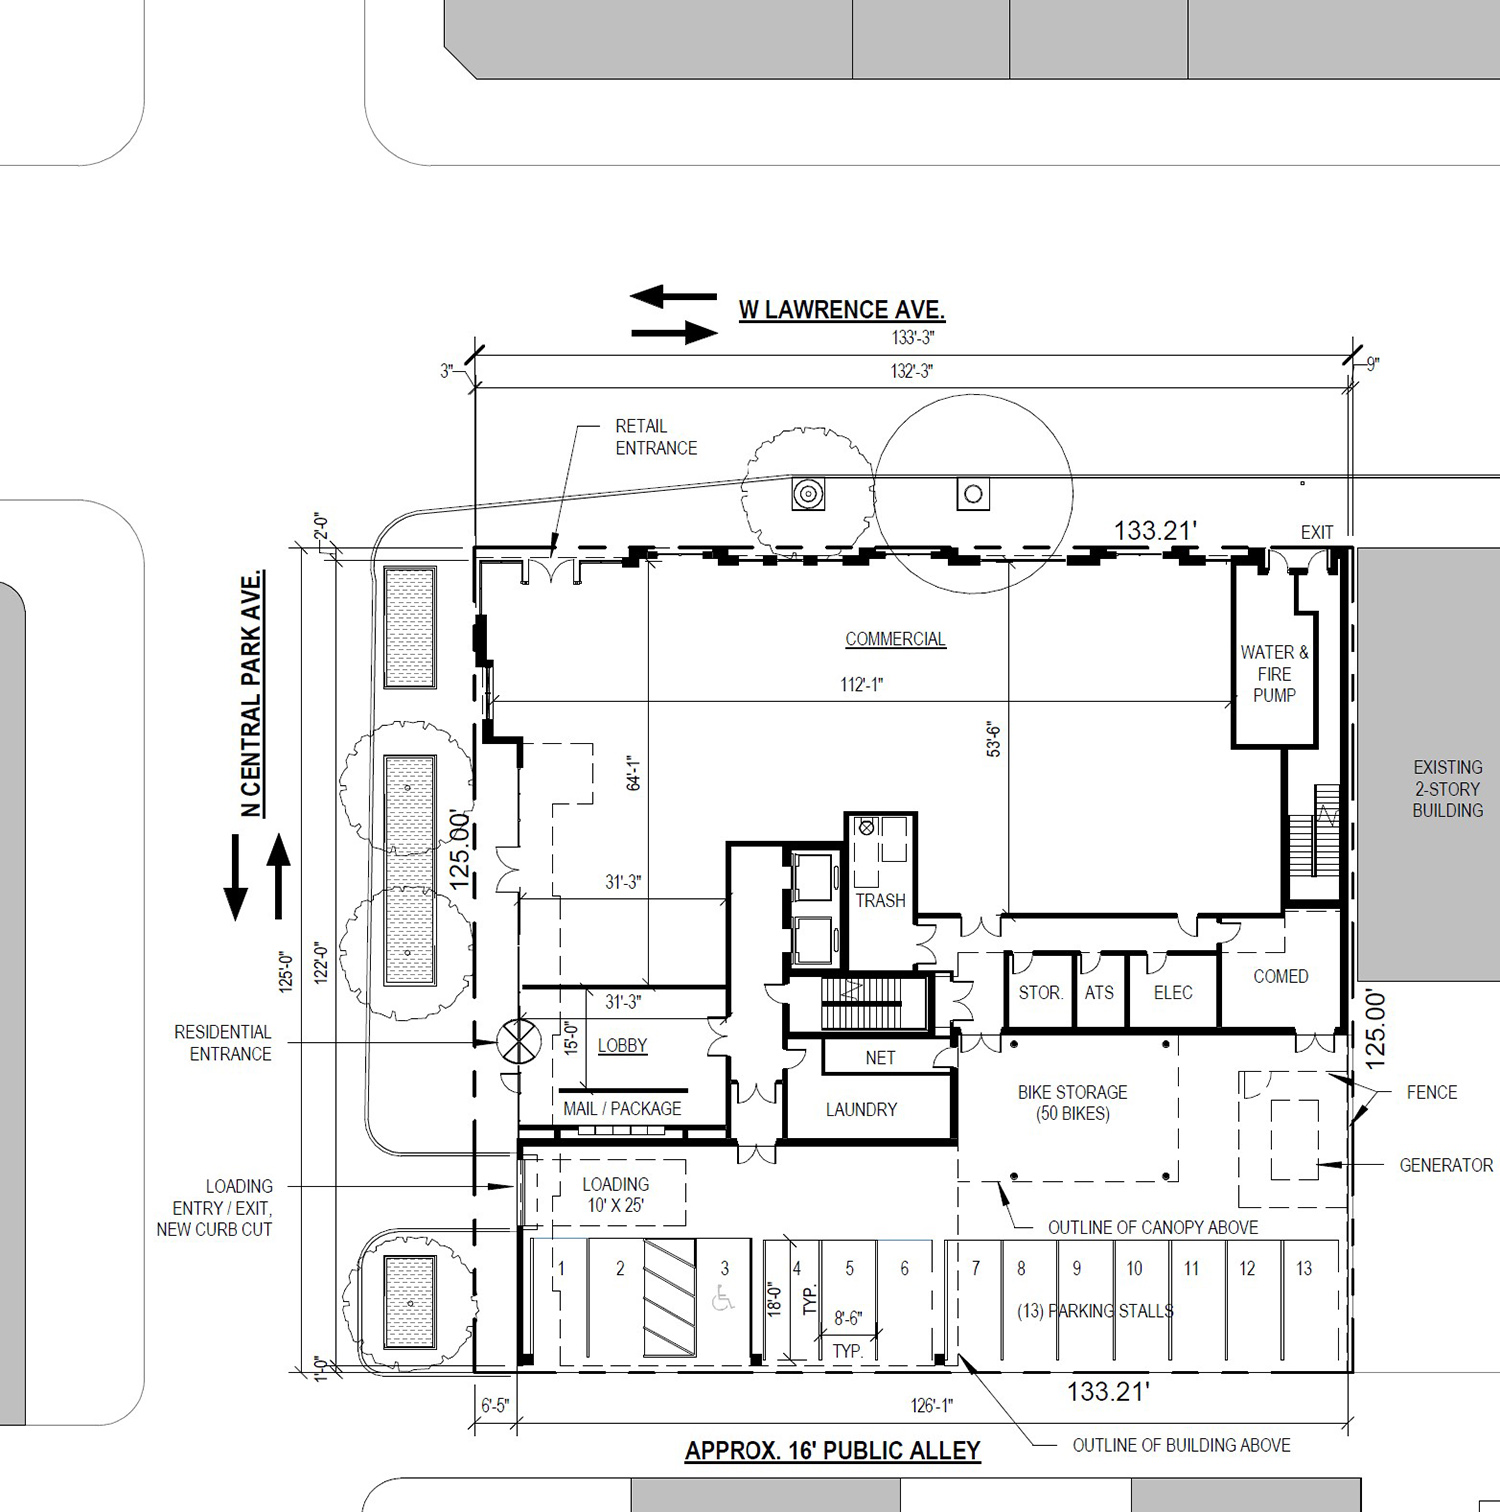 Ground Floor Plan for 3557 W Lawrence Avenue. Drawing by Skender